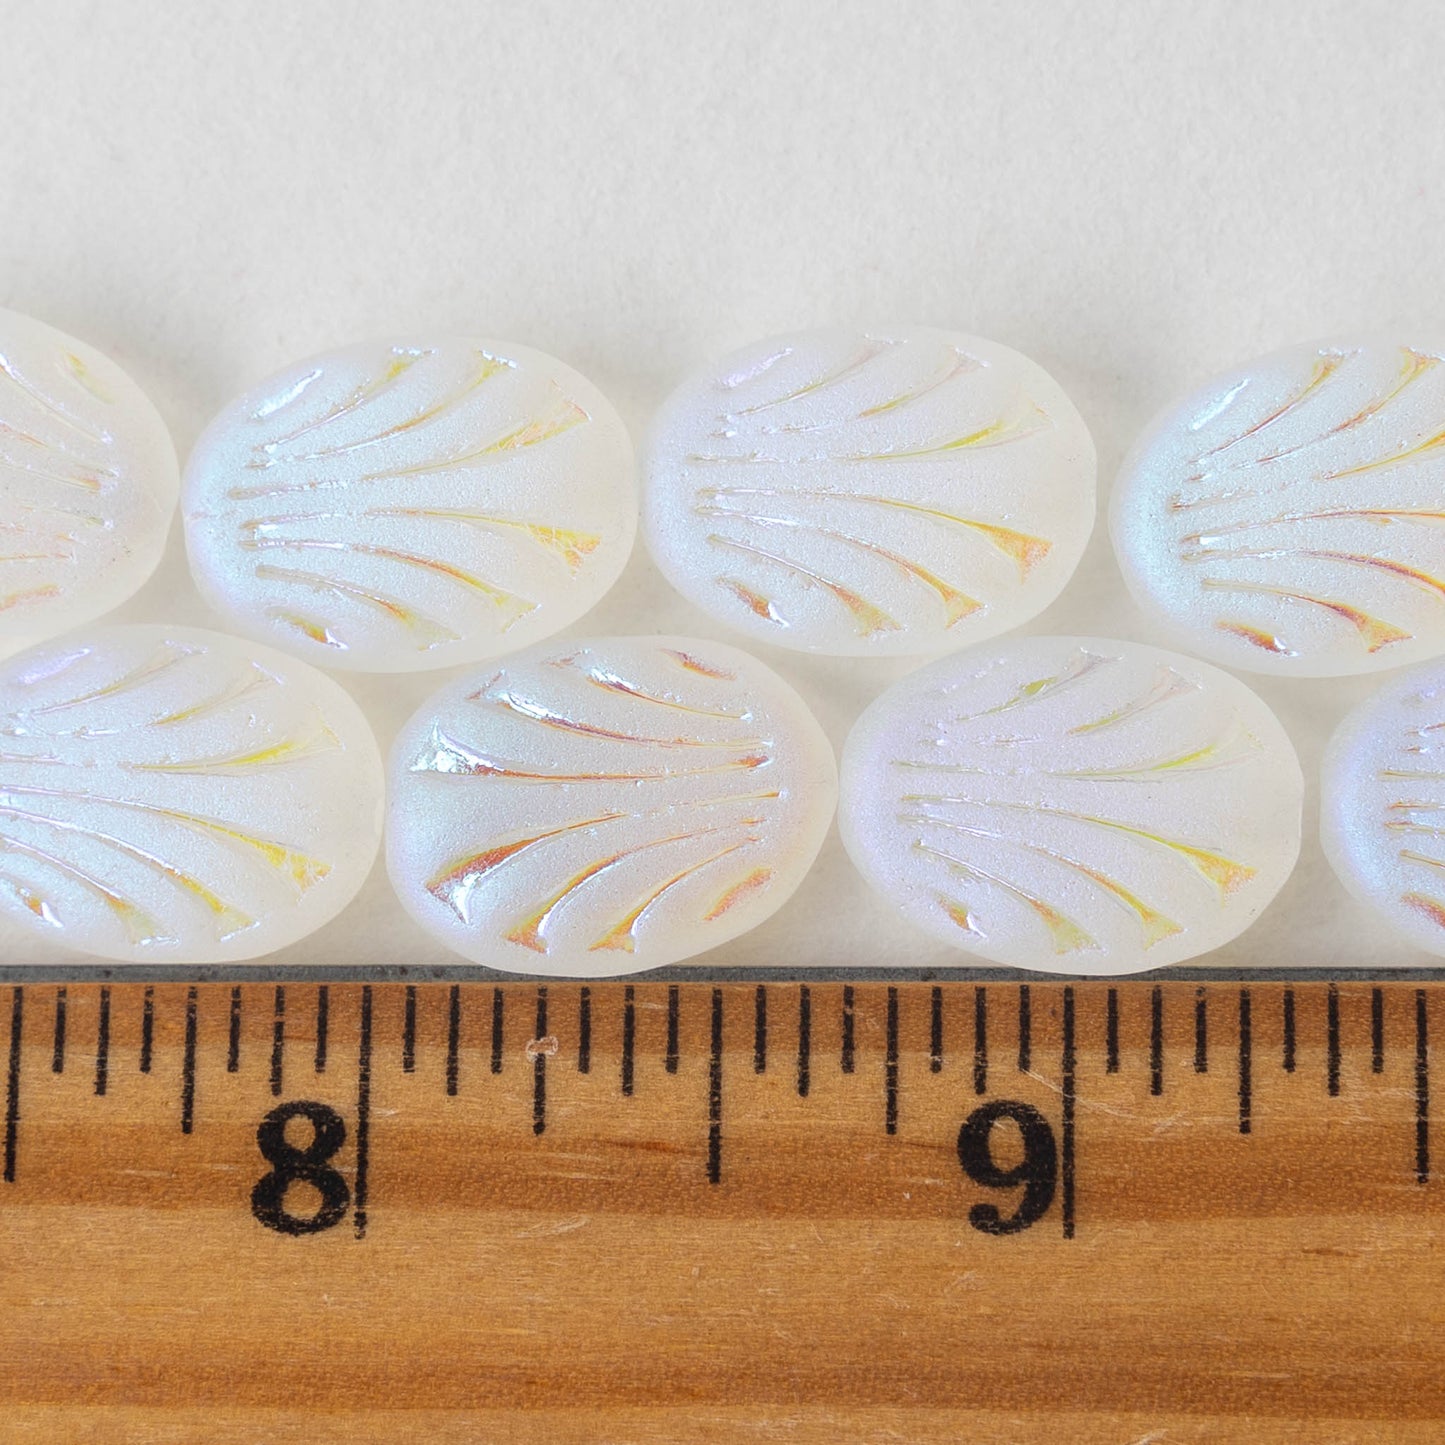 Art Deco Glass Oval - Crystal Matte AB - 10 beads